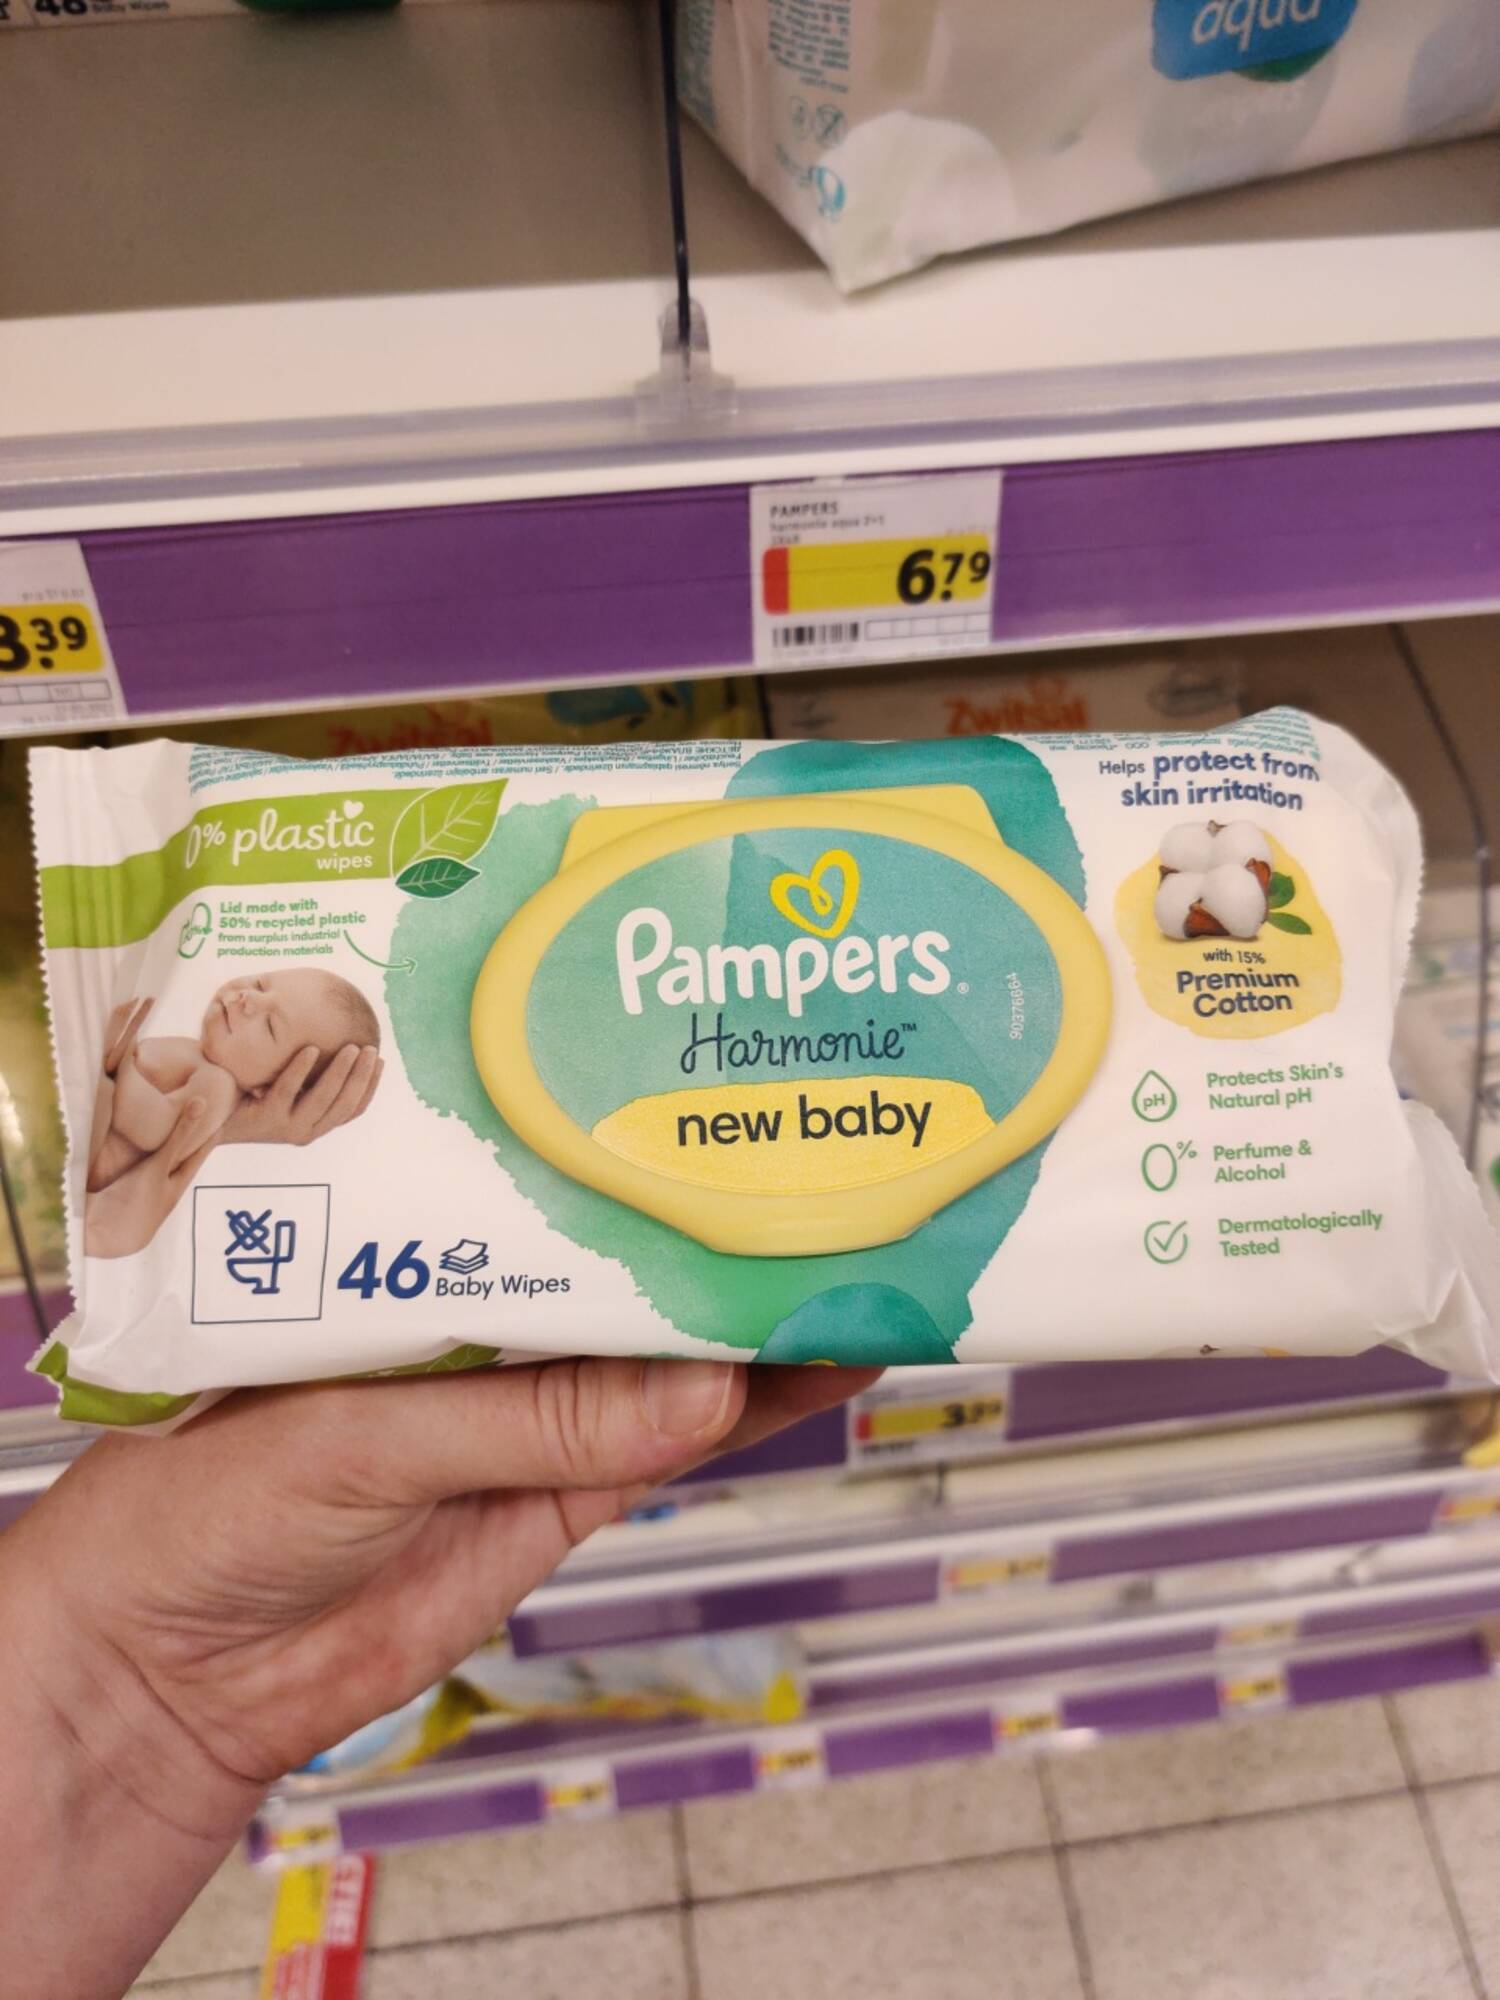 PAMPERS - Harmonie new baby - 46 baby wipes